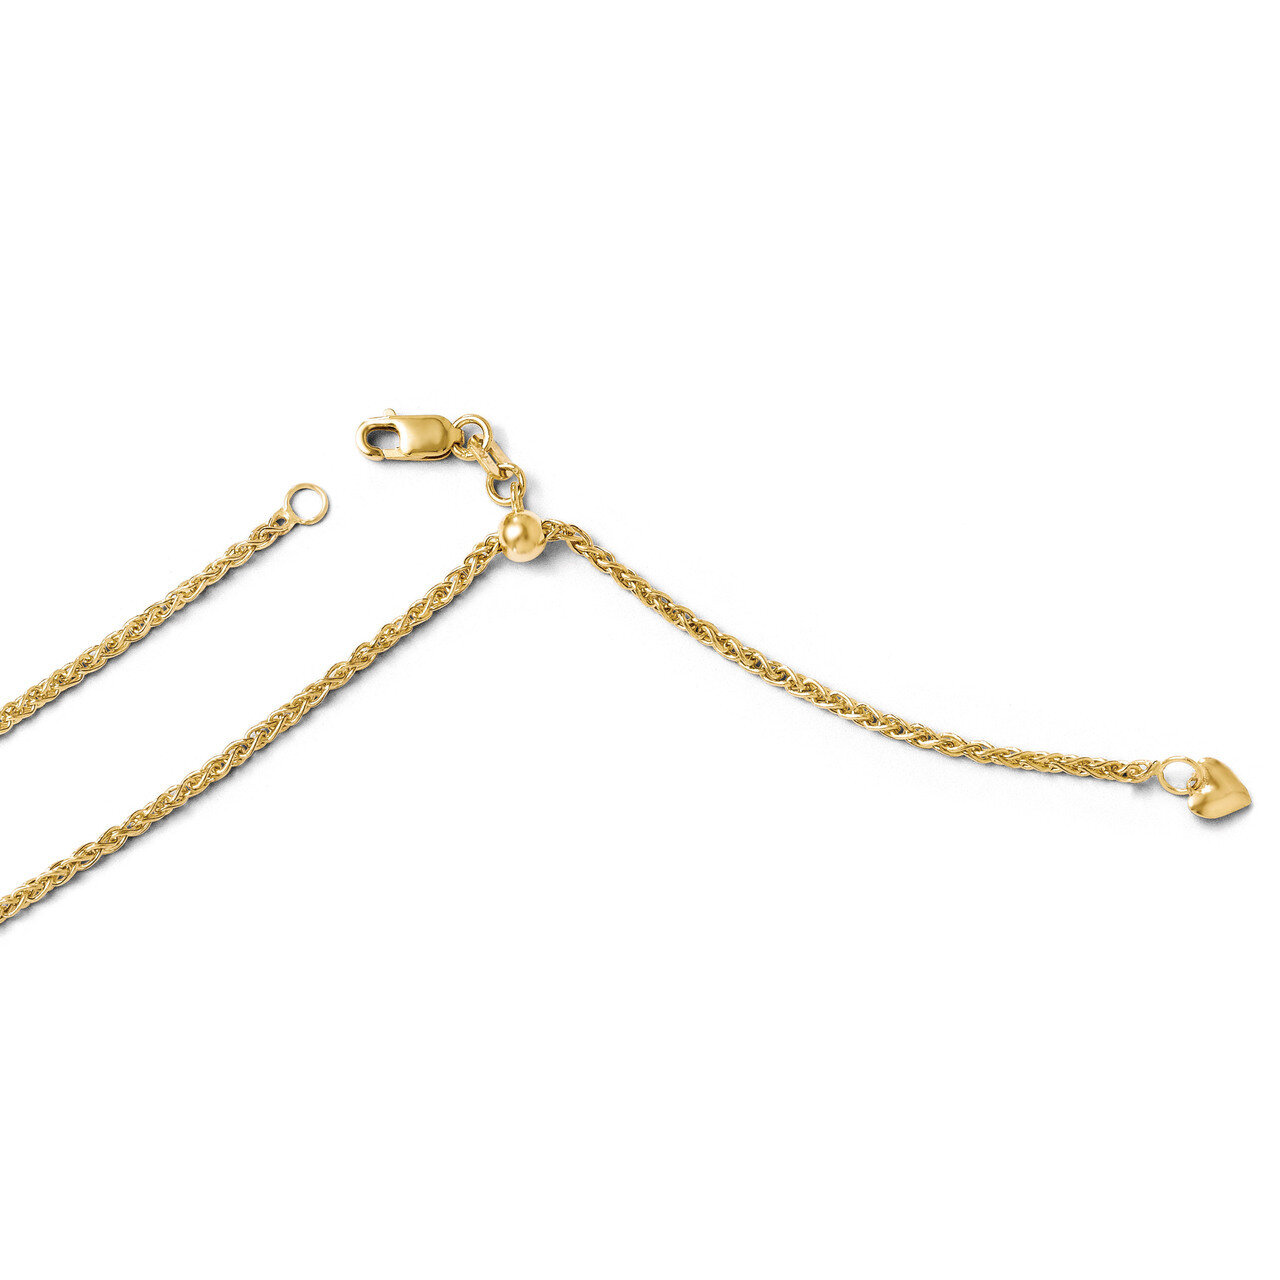 Adjustable Semi Solid Chain 30 Inch - 14k Gold HB-1208-30